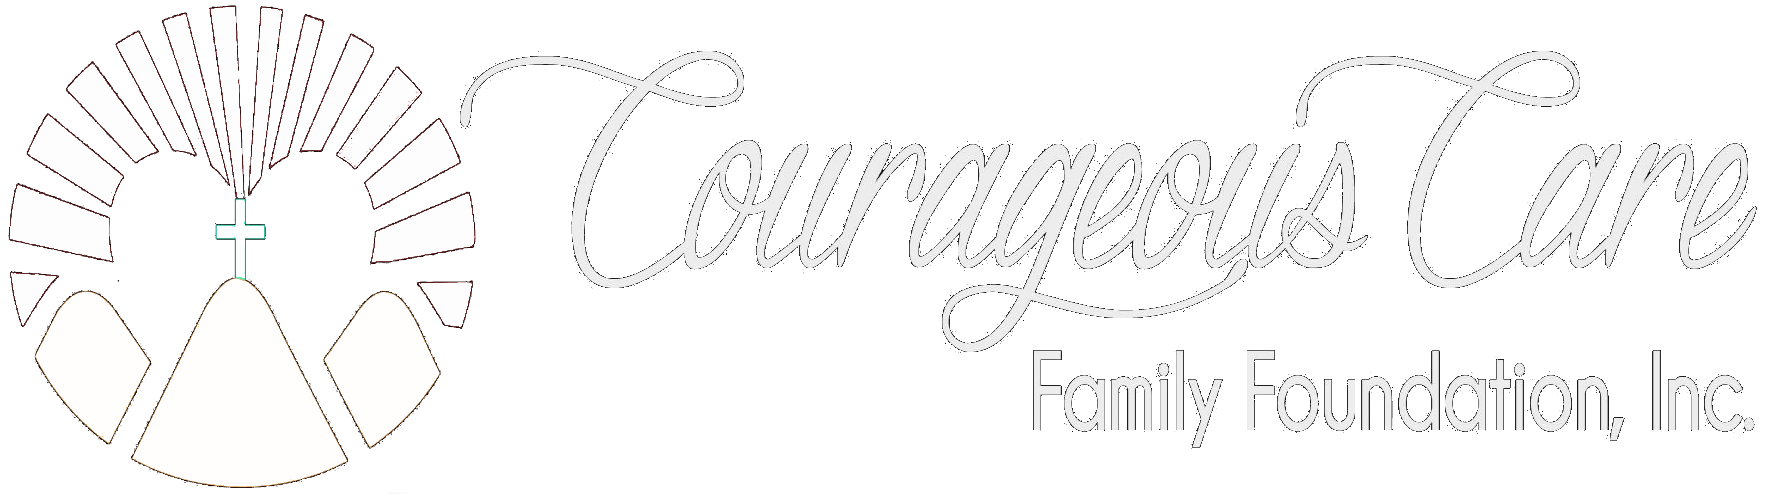 Courageous Care Family Care Foundation